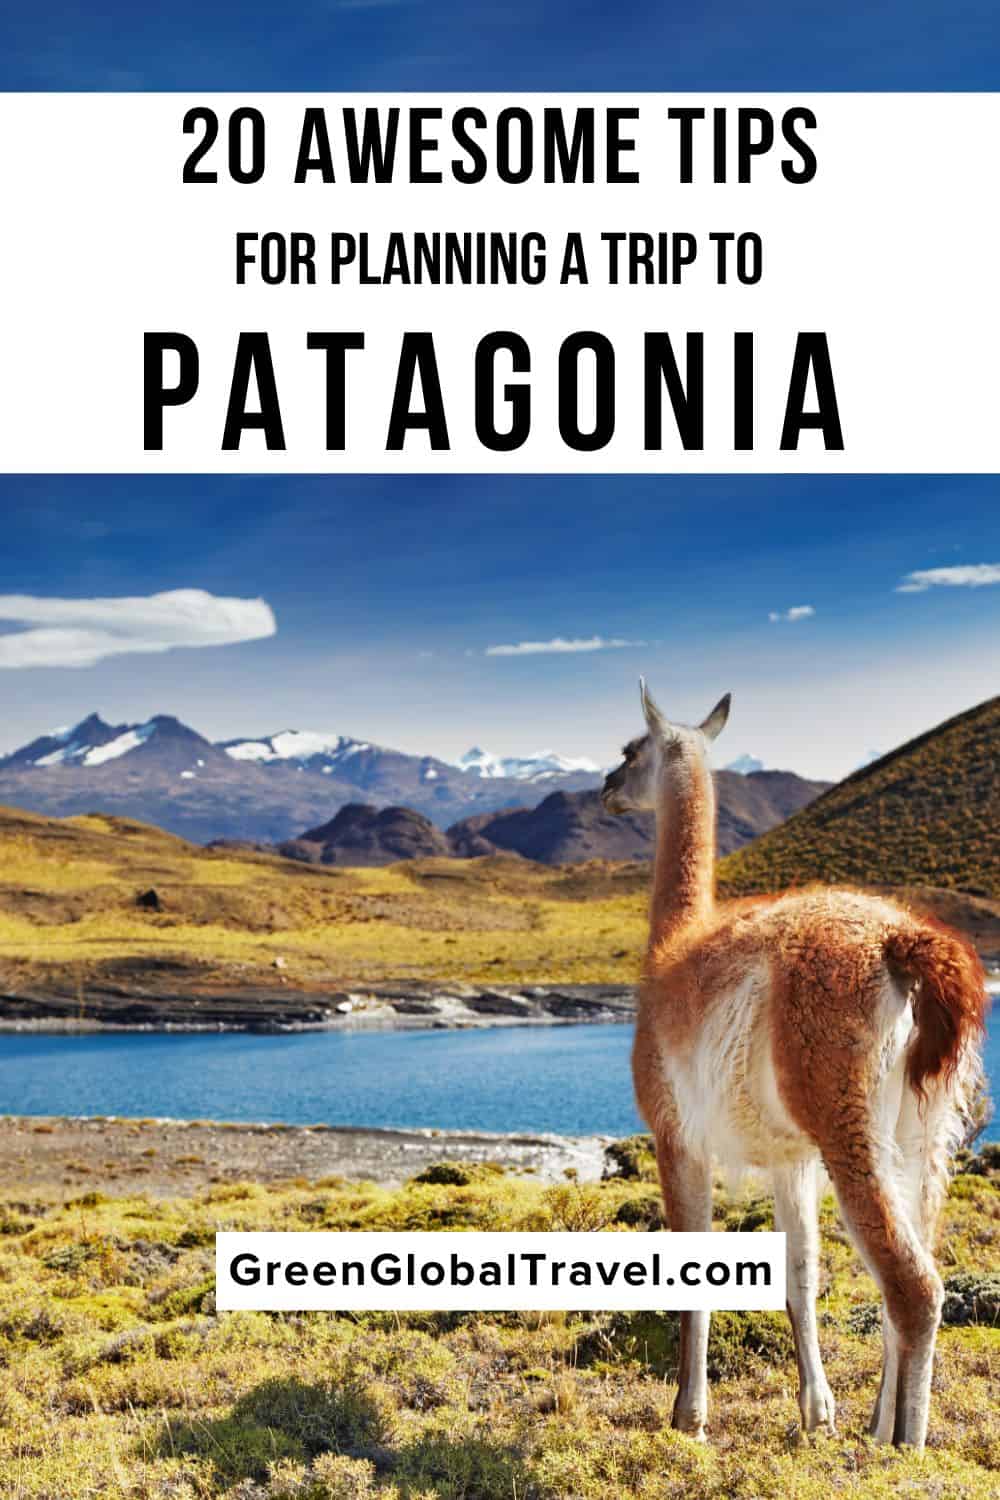 20 Awesome Tips for Planning Your Patagonia Trip including what to expect, things to know before you go, places to visit, and choosing tours.